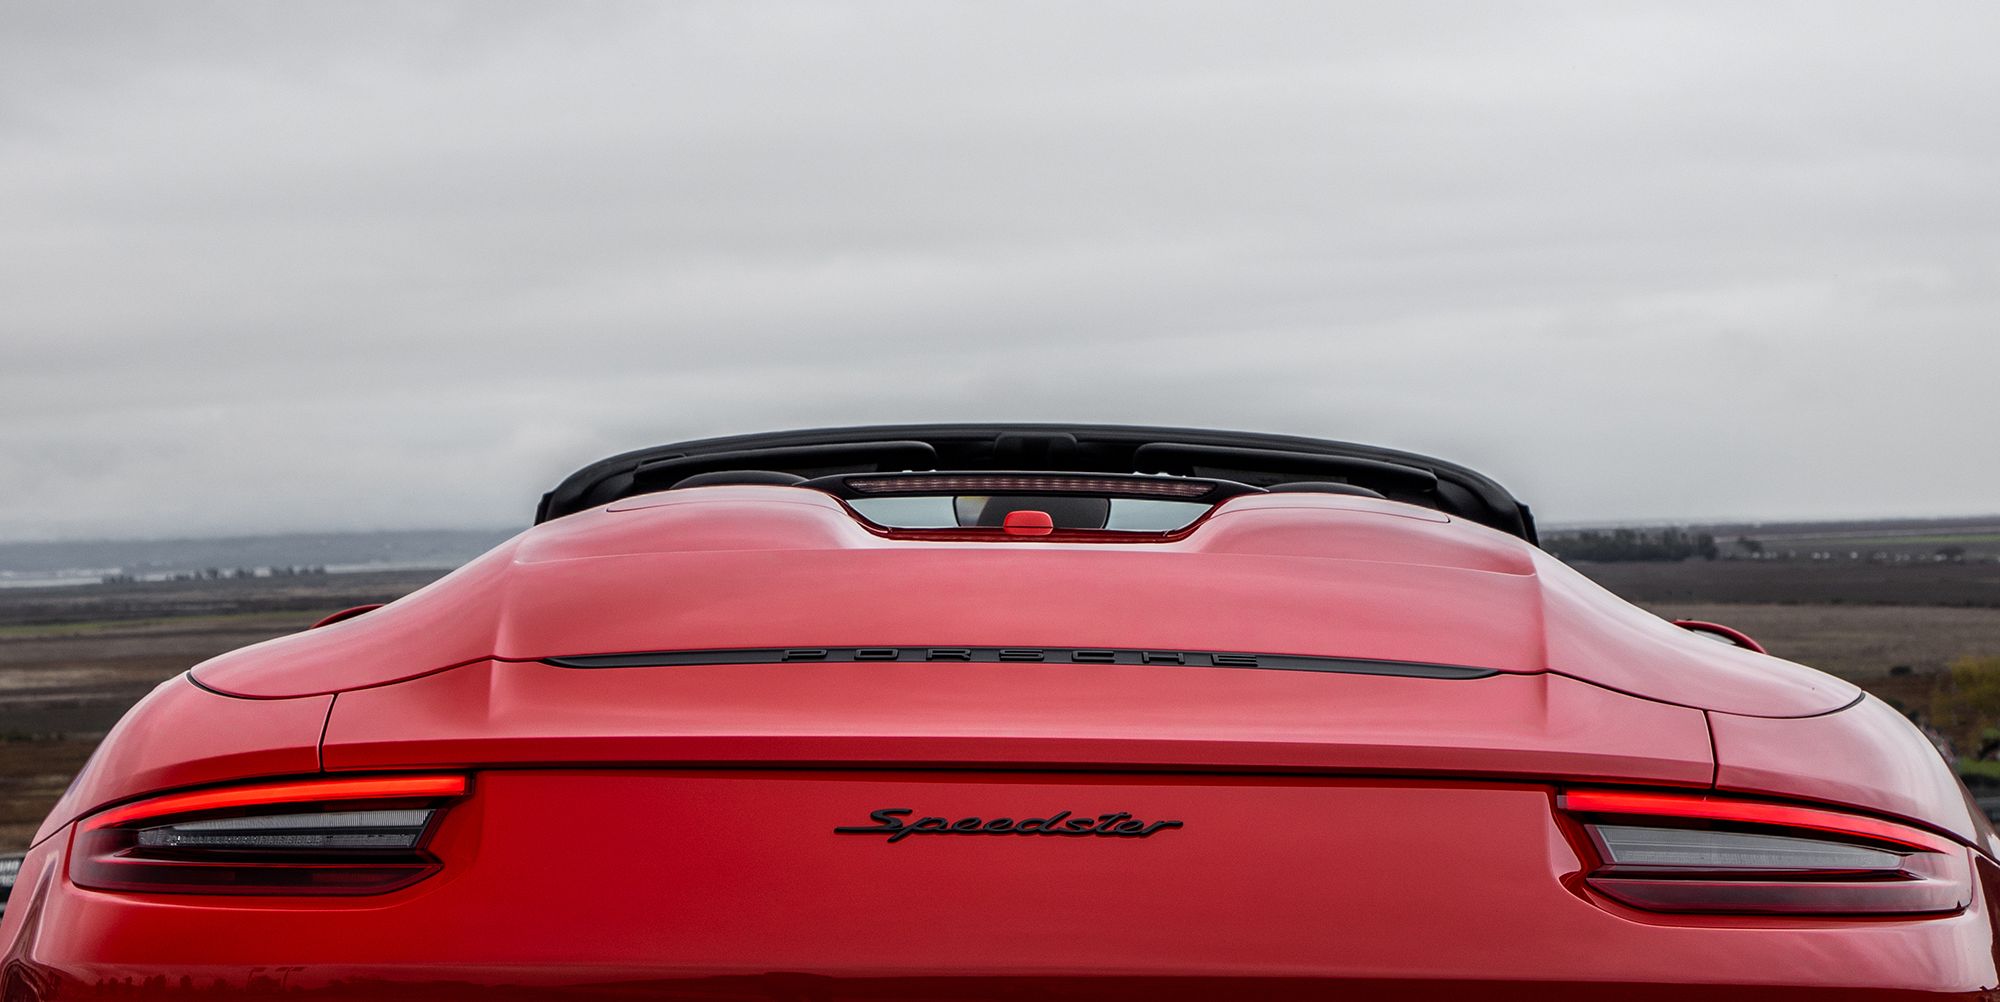 A New GT3-Powered Porsche 911 Speedster Is Reportedly Coming Soon